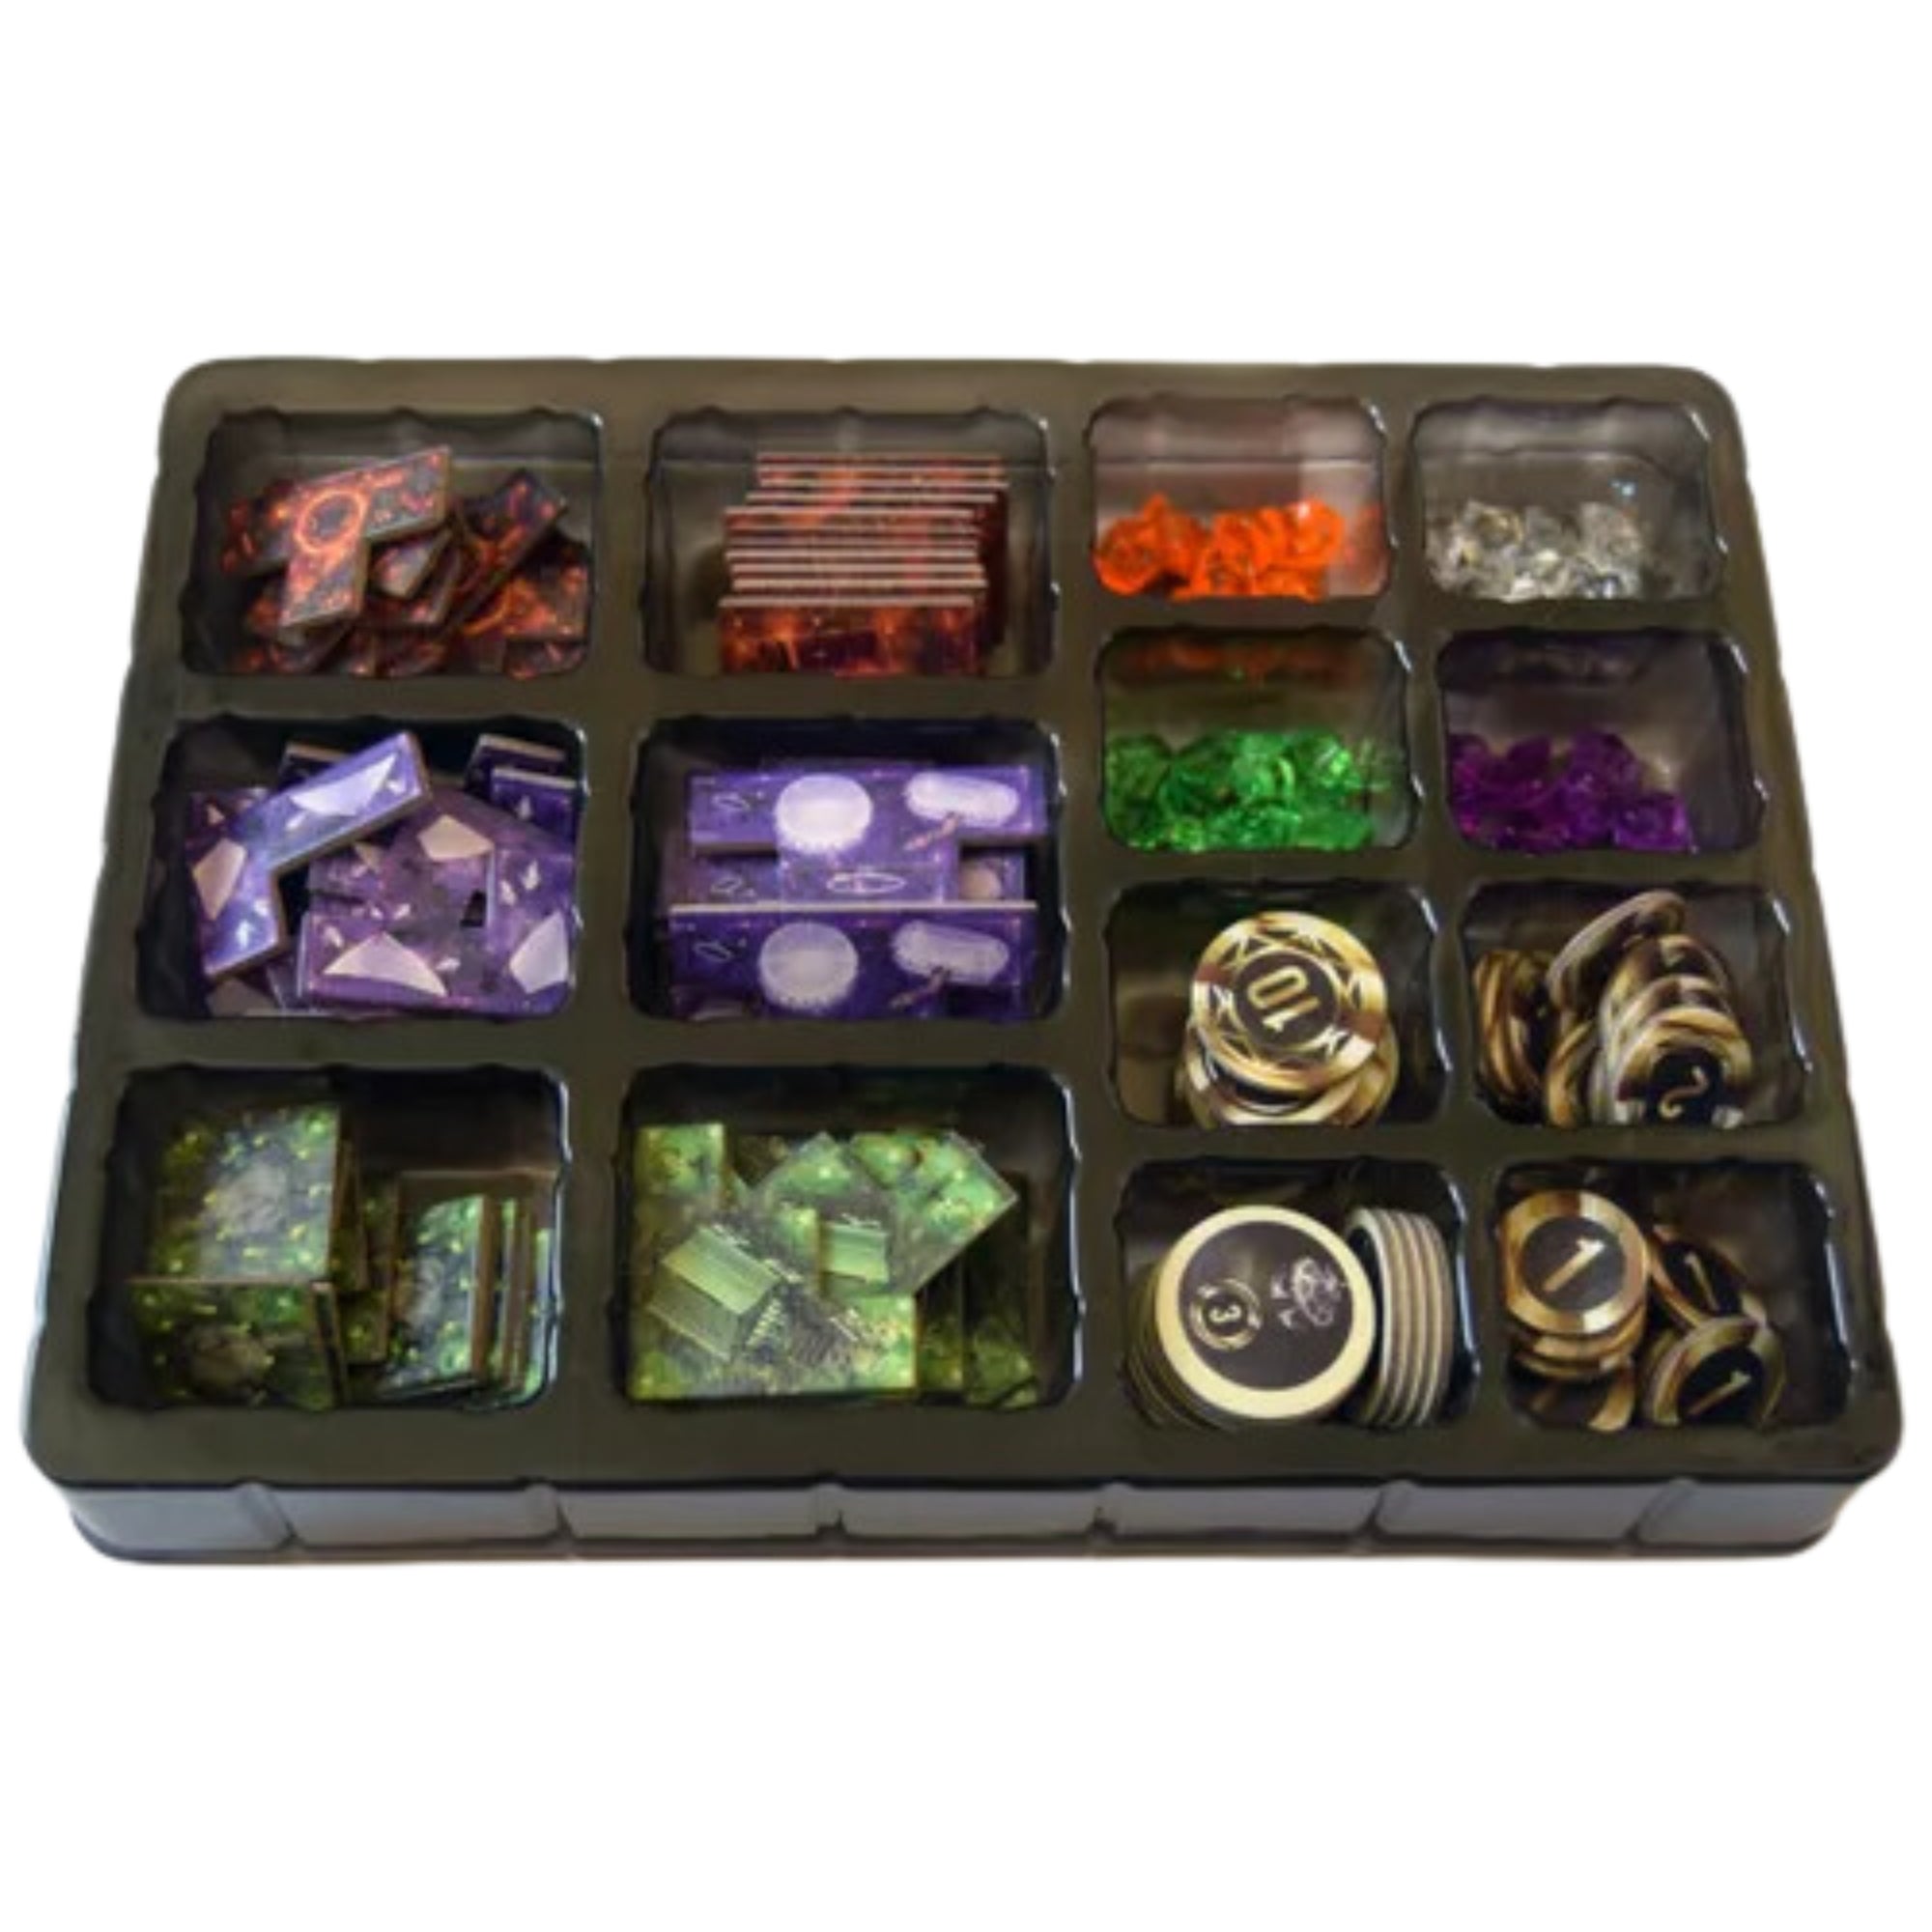 The Magnificent components in tray